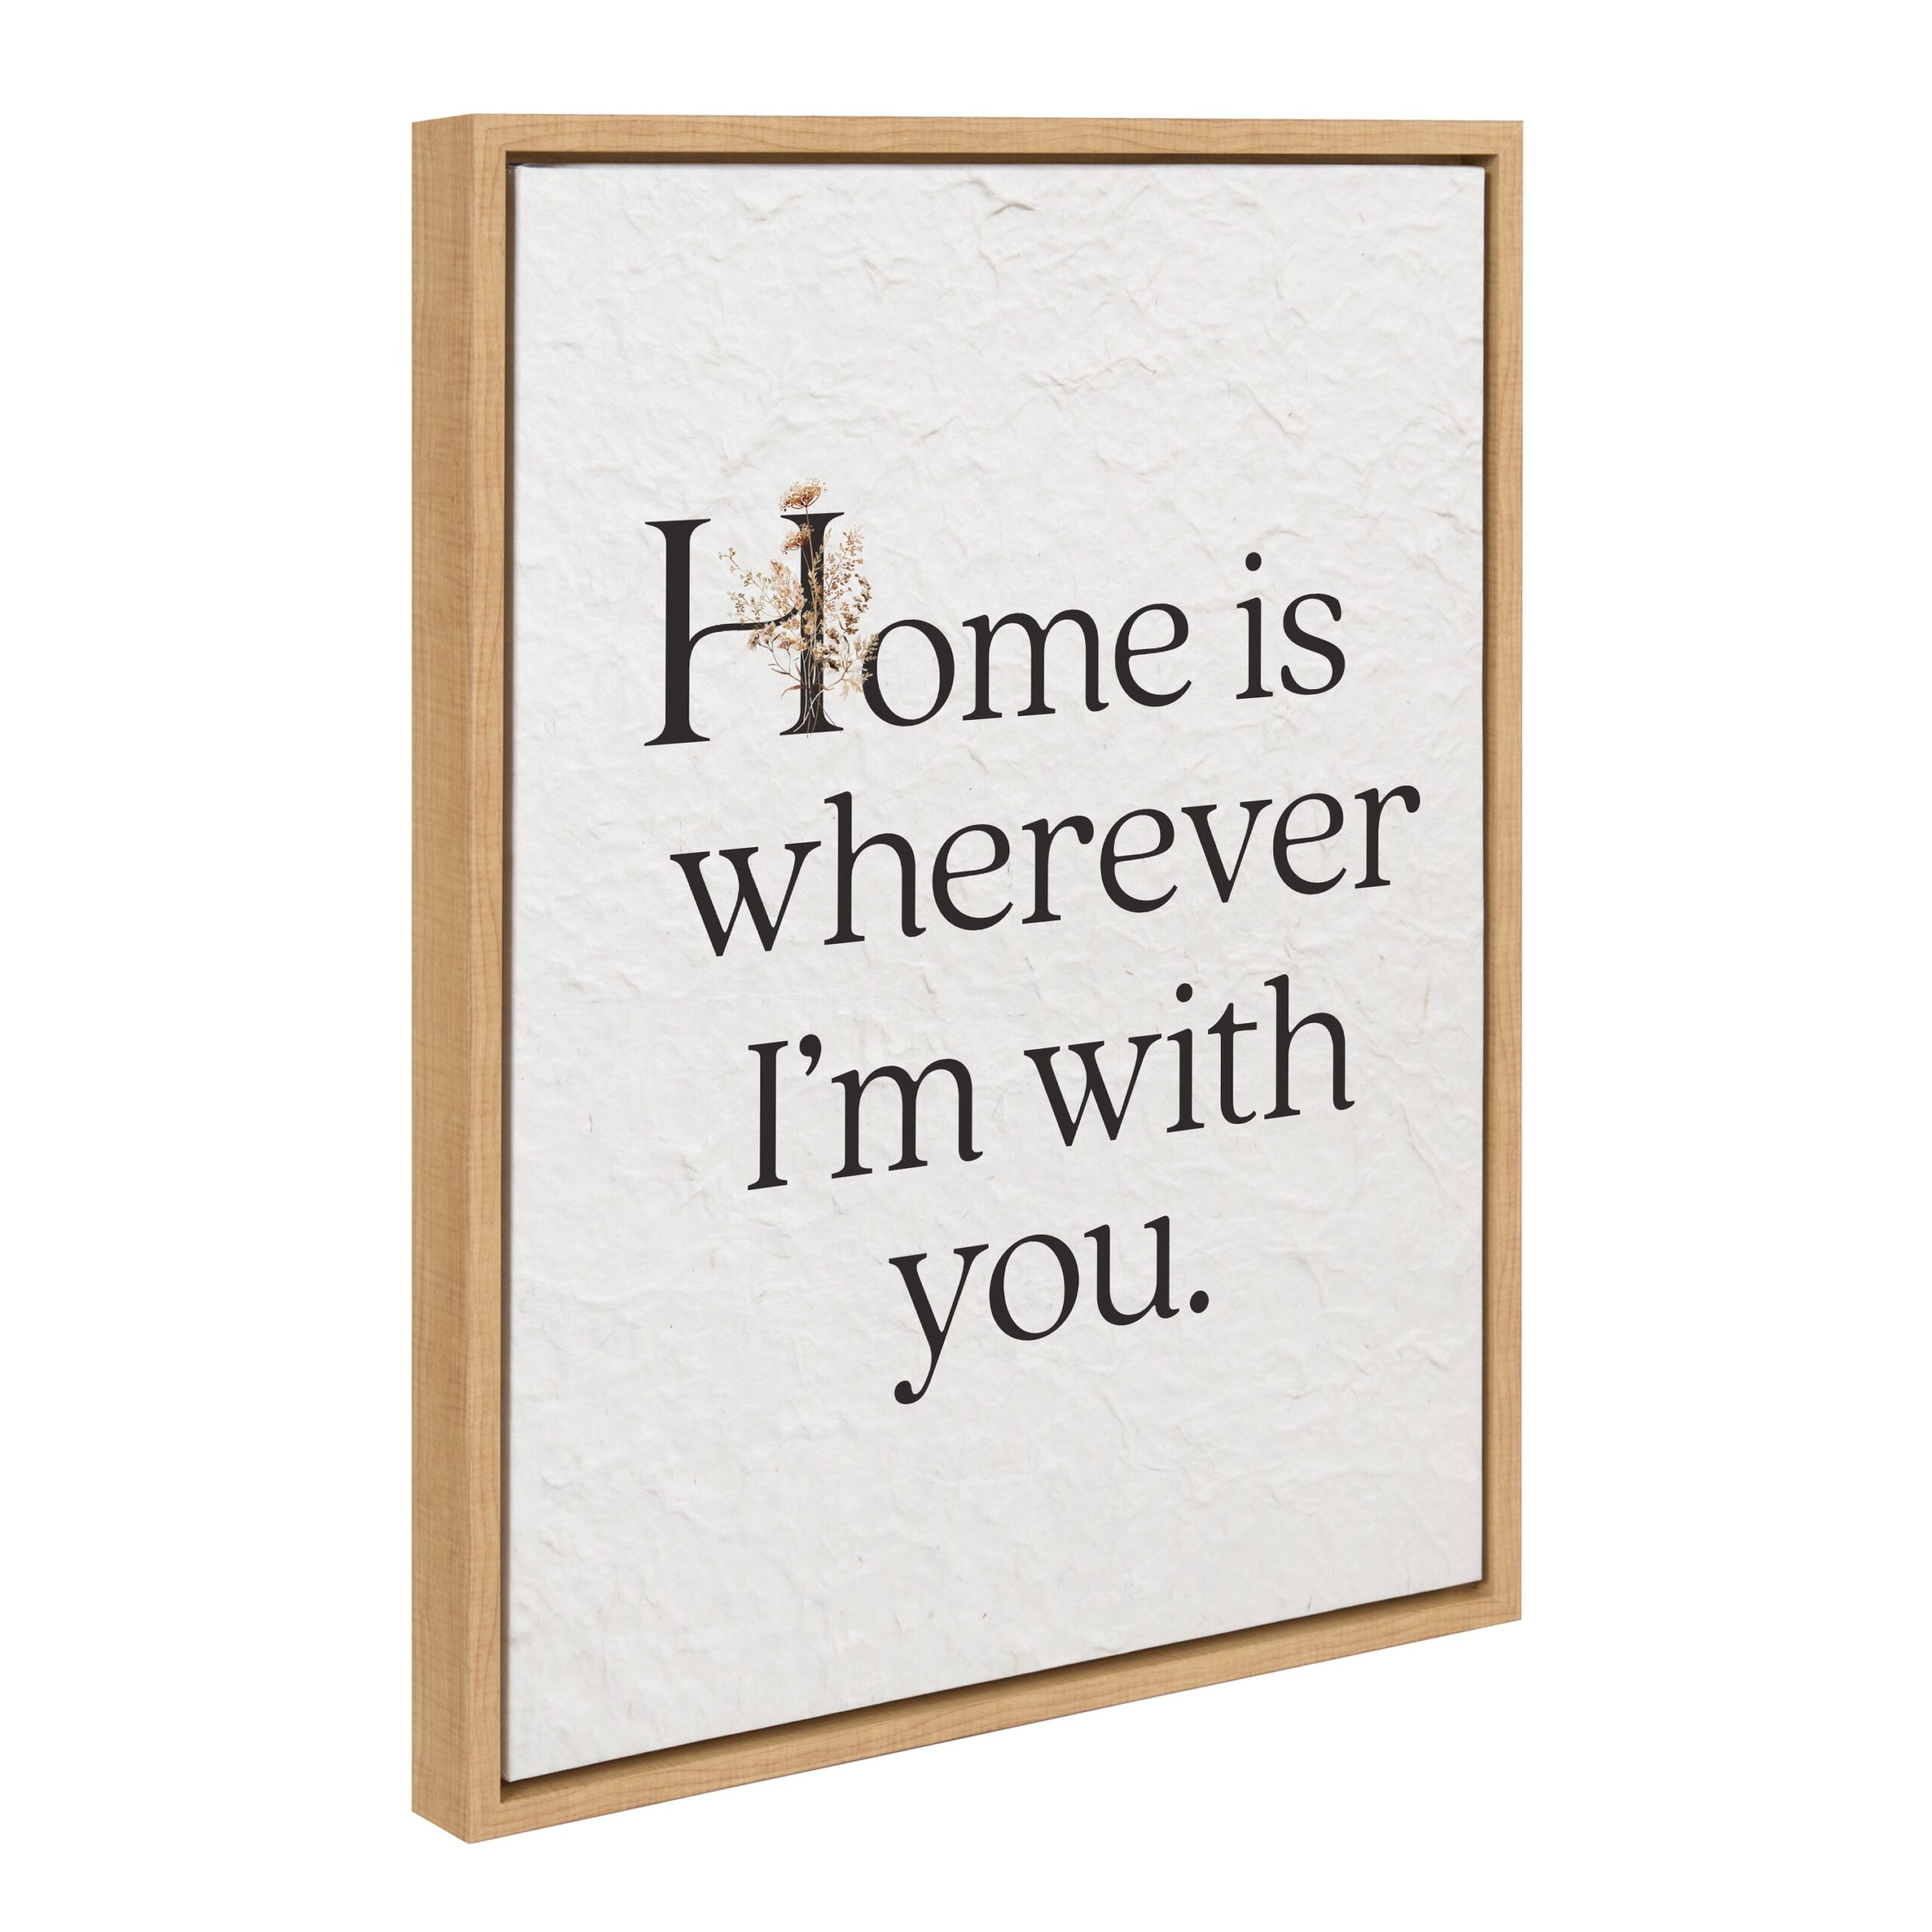 Home is wherever I'm with you / 18x24 Framed Canvas